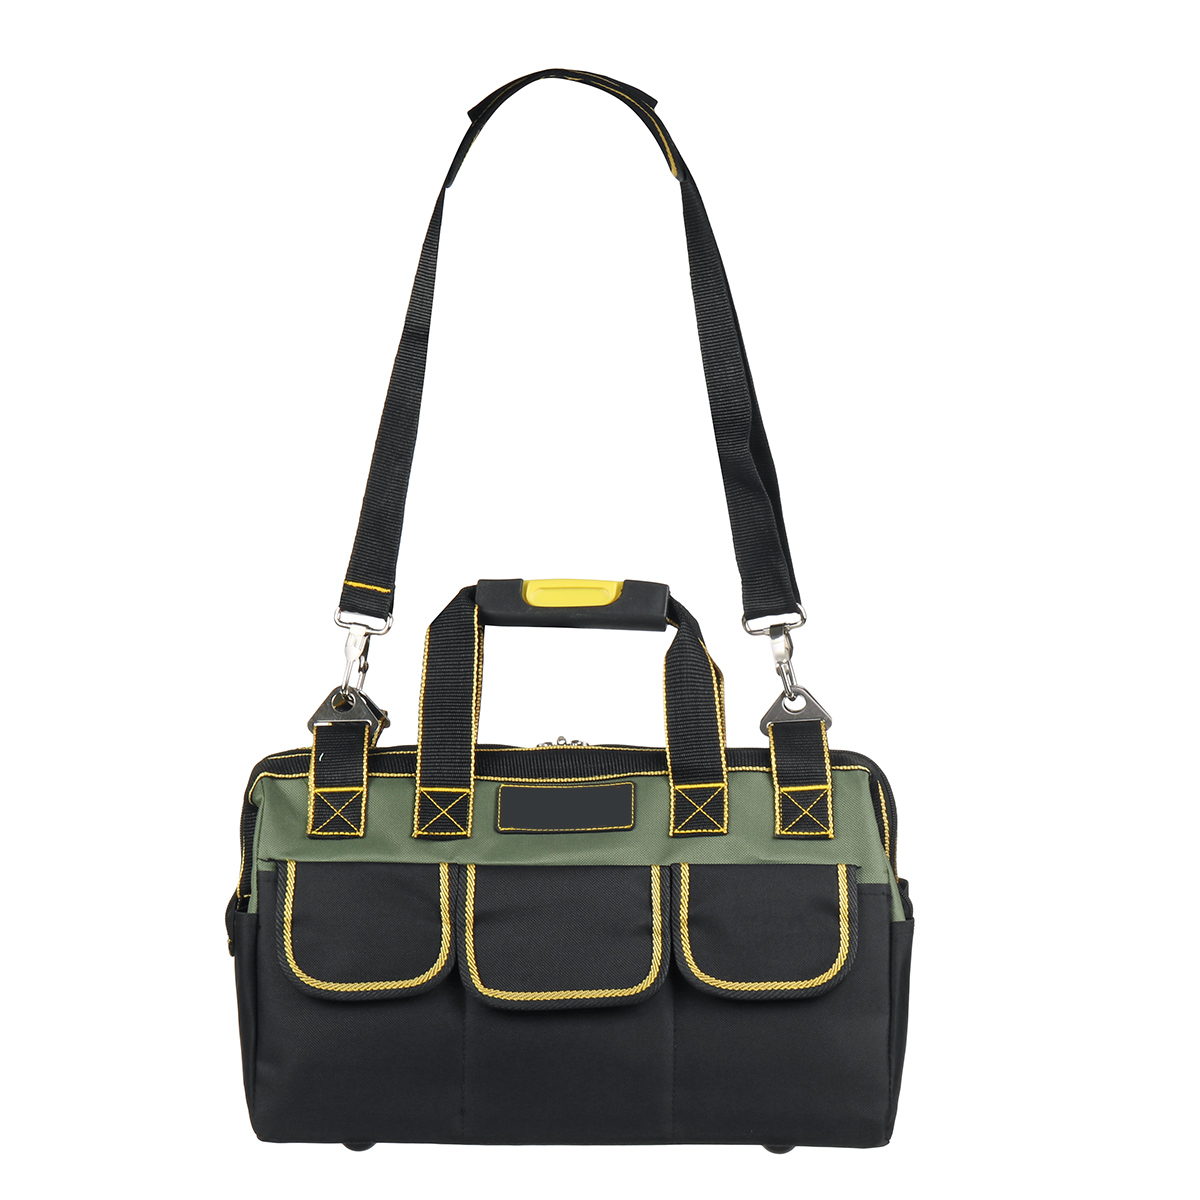 1680D-Multifunction-Oxford-Cloth-Tool-Bag-Storage-Pocket-Tools-Pouch-Holder-Bag-1668294-10